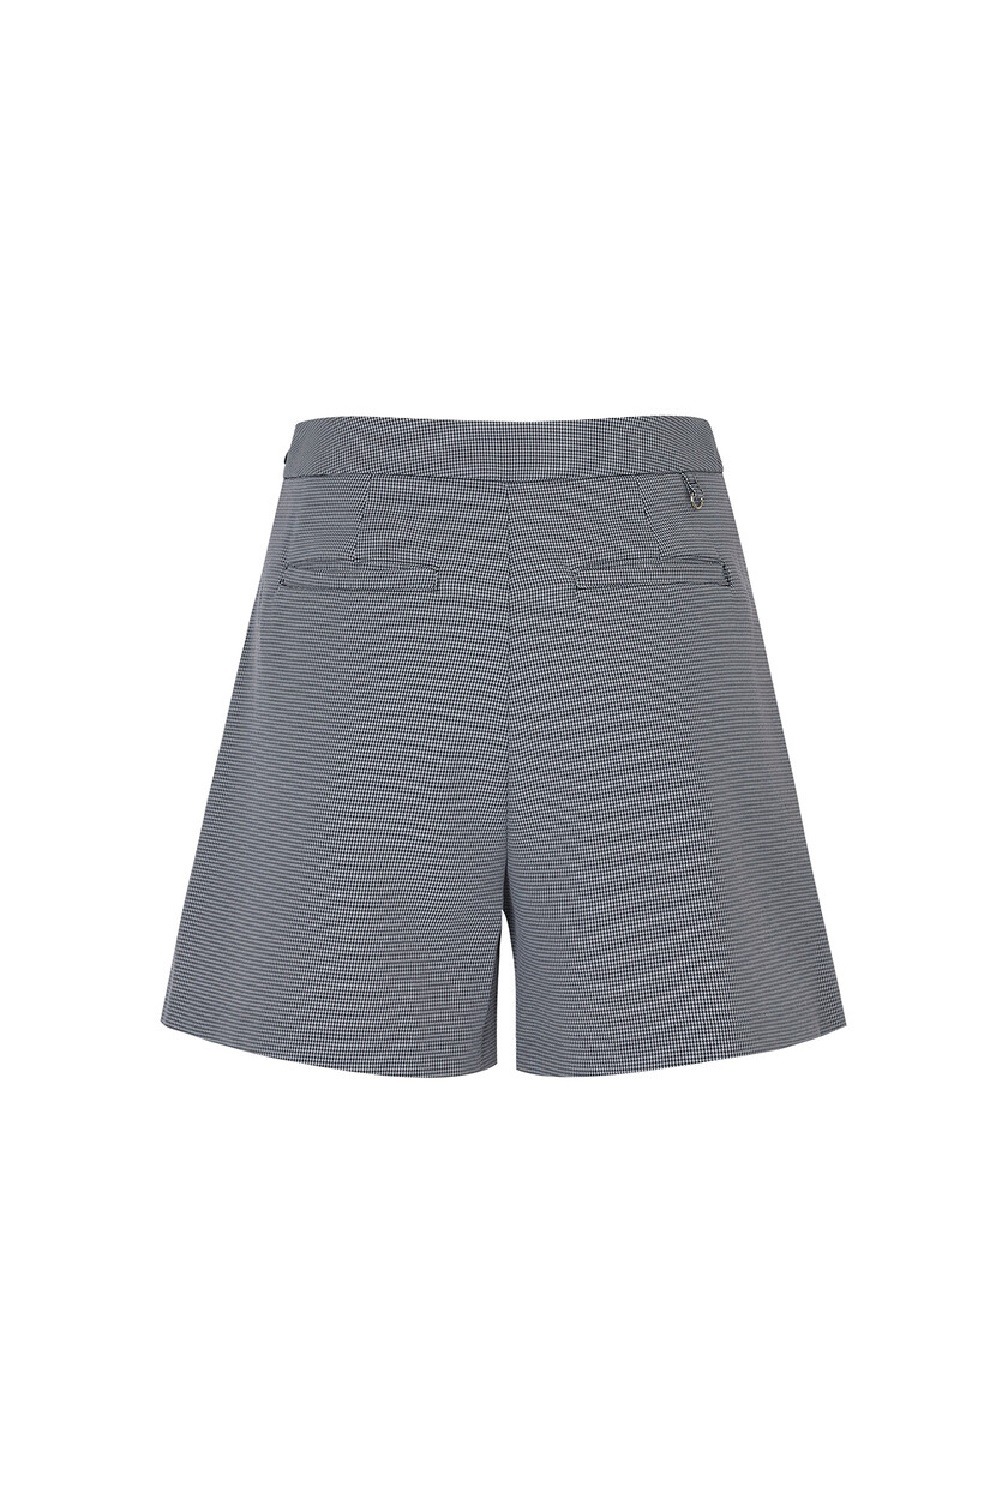 ESSENTIAL HOUNDSTOOTH SHORTS W/INNER PANTS_Navy